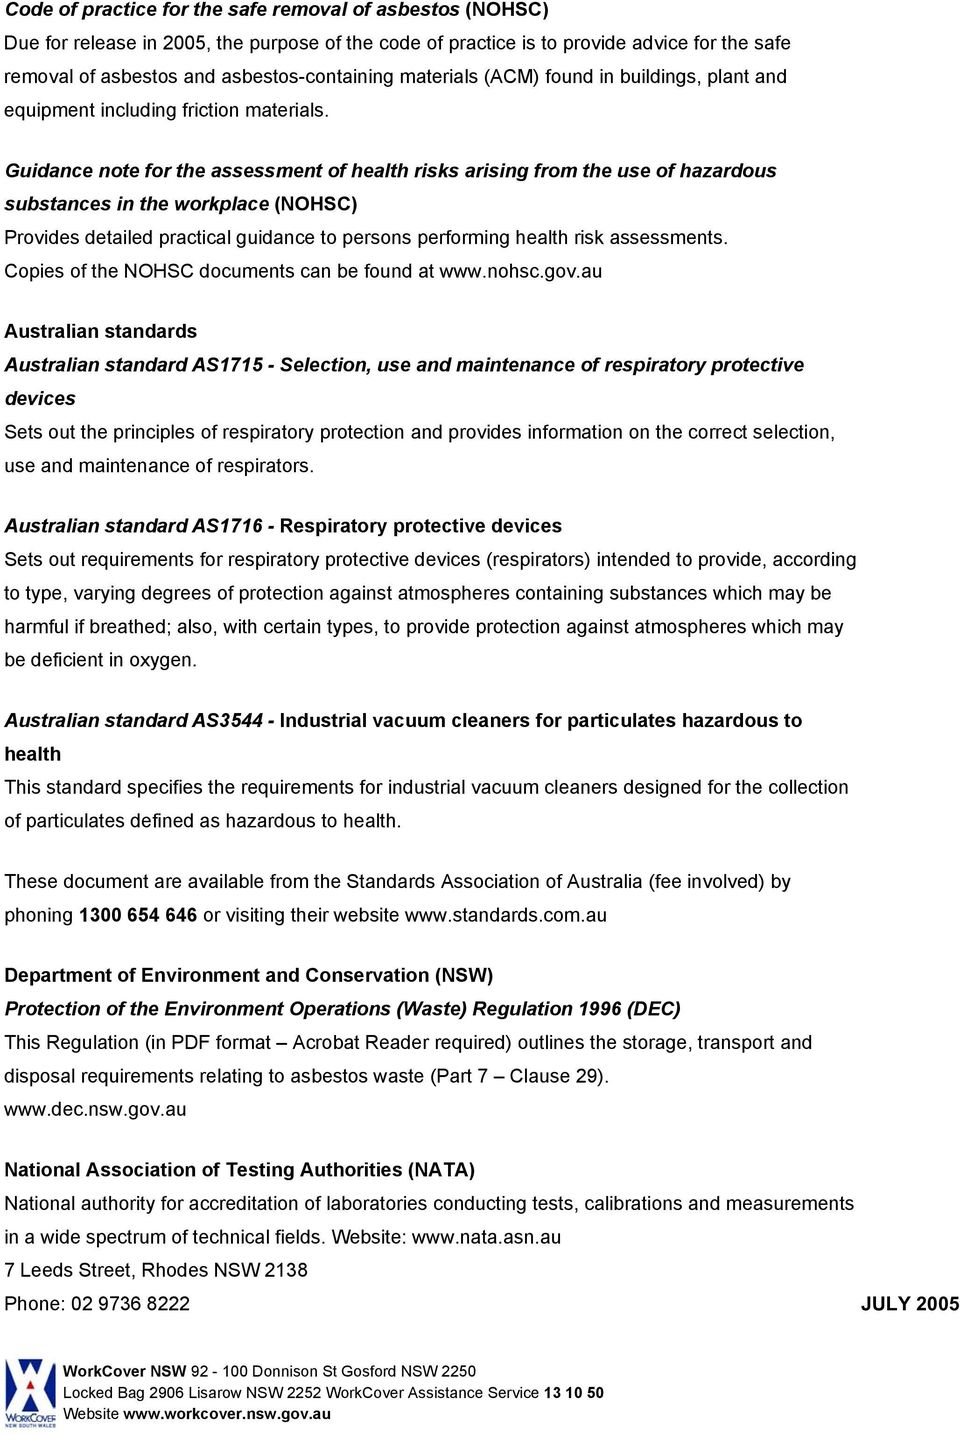 Guidance note for the assessment of health risks arising from the use of hazardous substances in the workplace (NOHSC) Provides detailed practical guidance to persons performing health risk